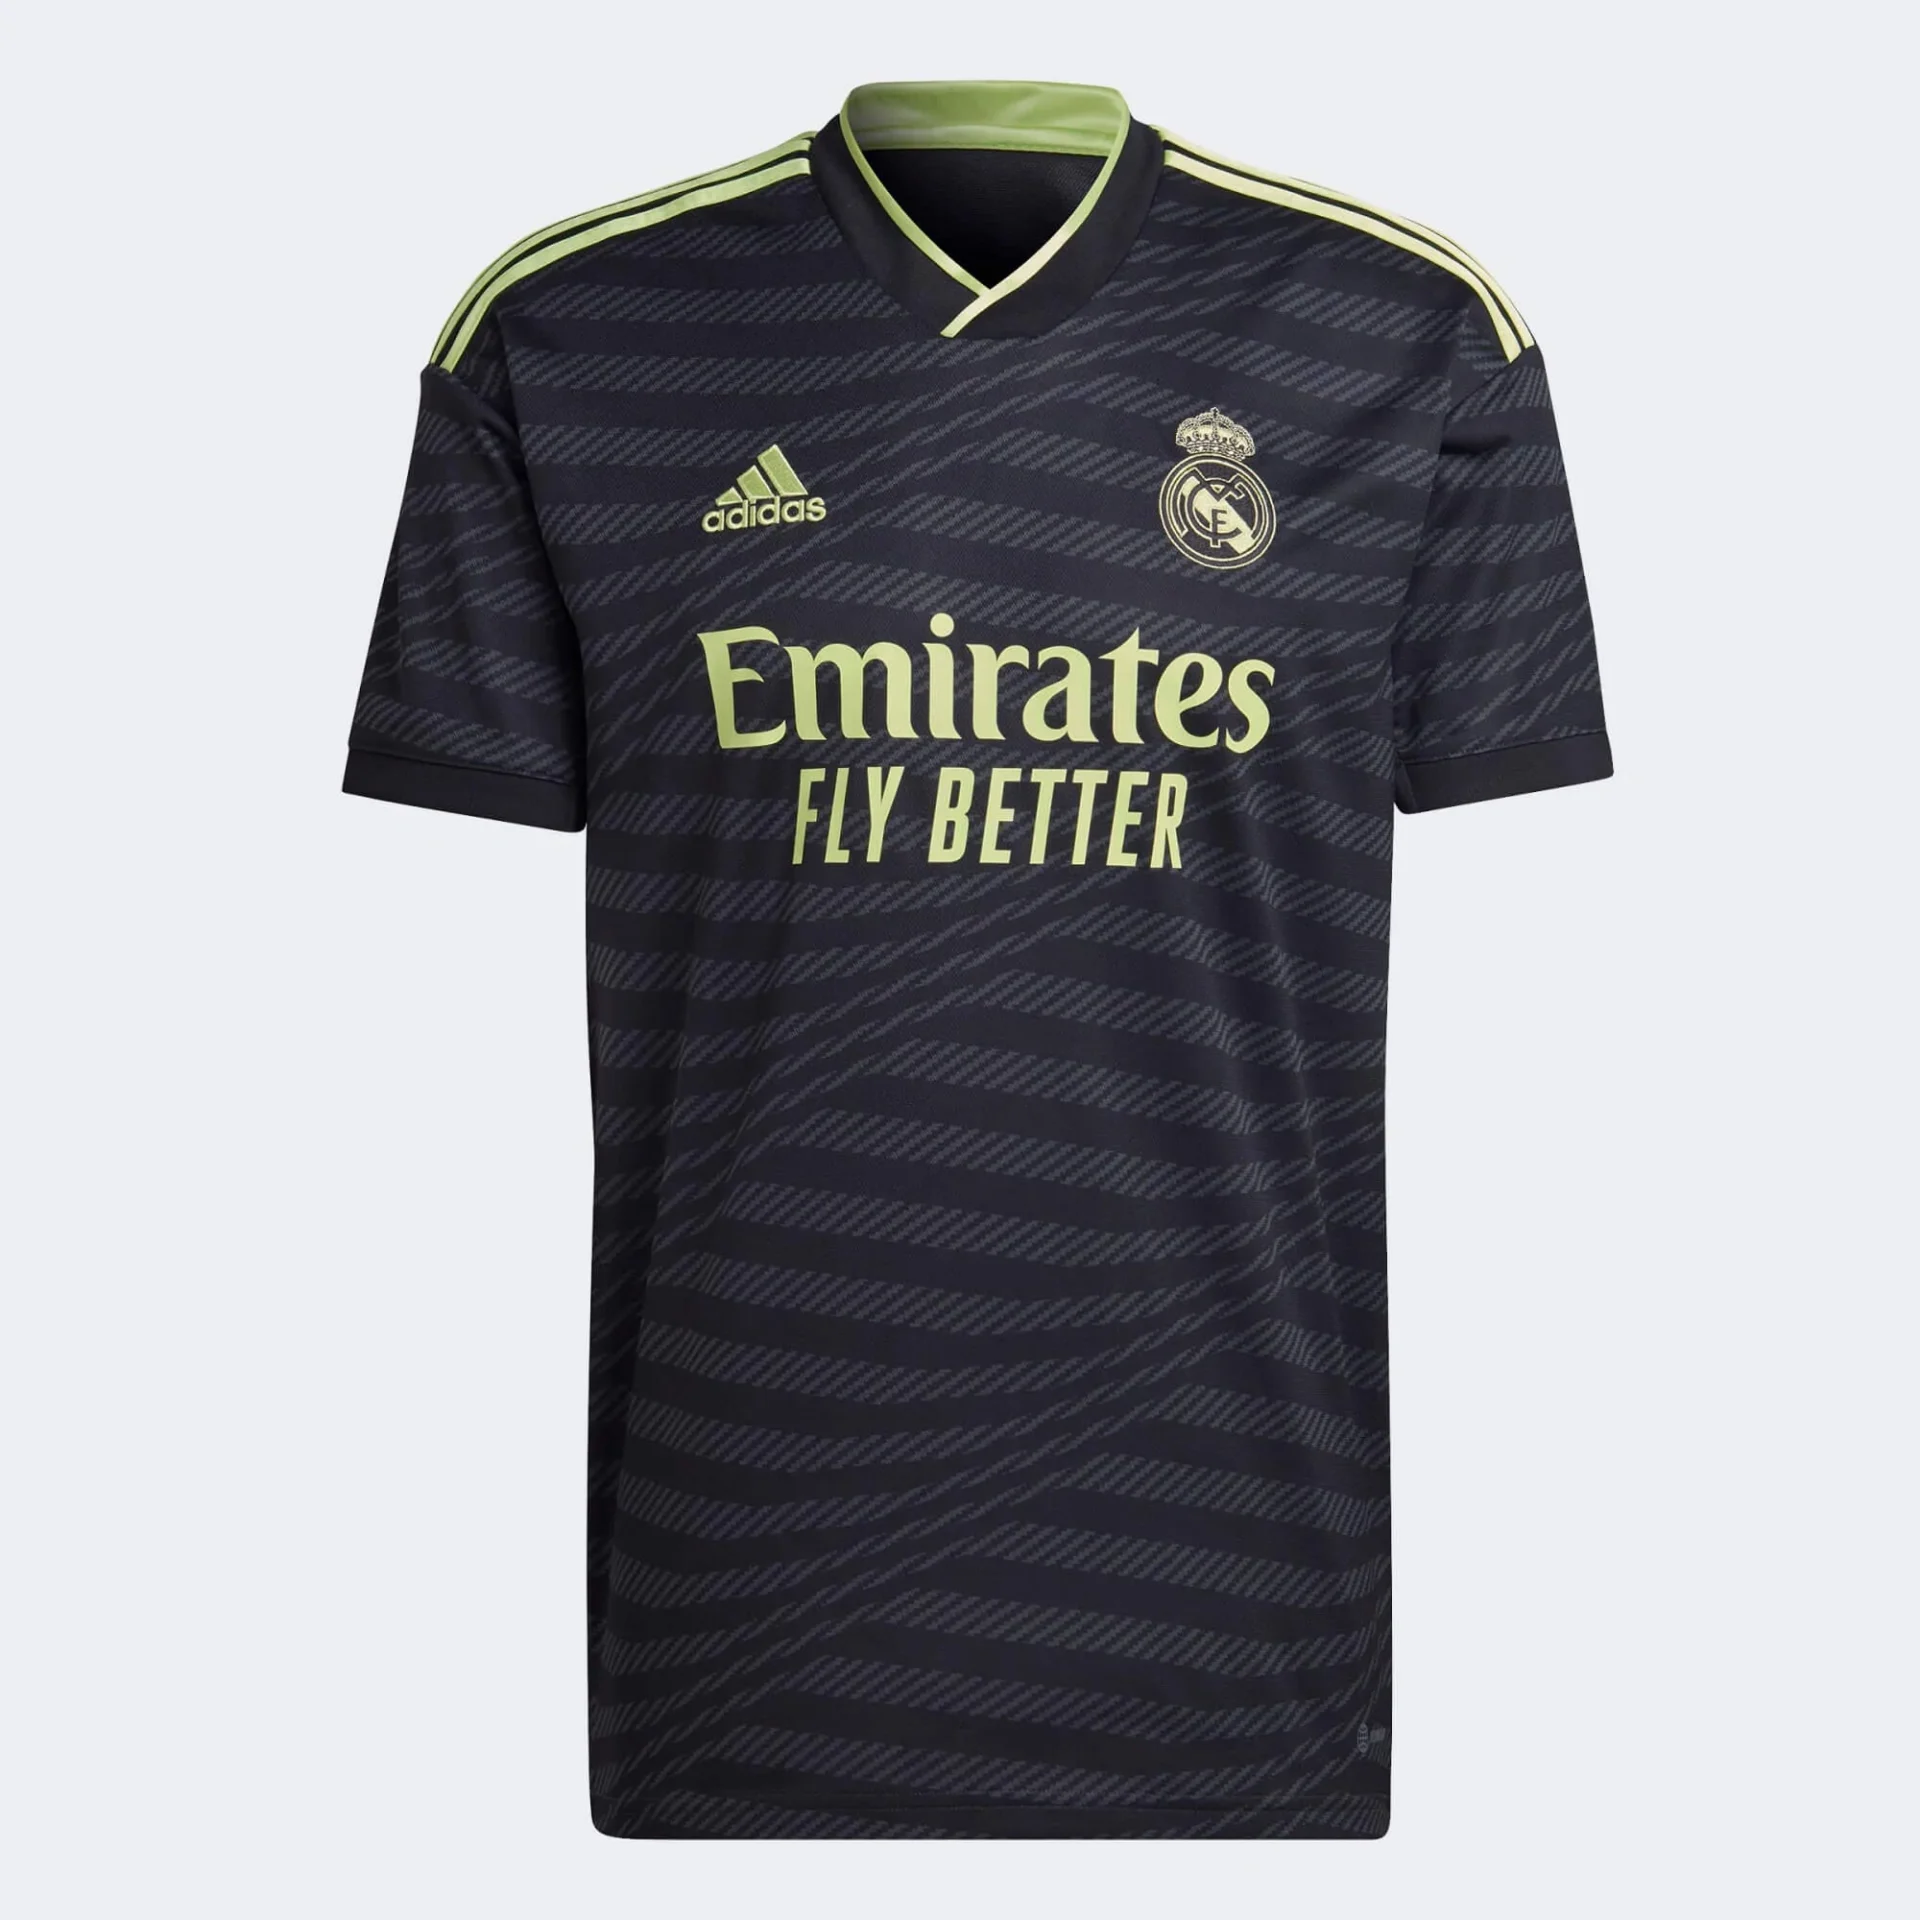 adidas 2022-23 Real Madrid Third Jersey - Black- Pulse Lime